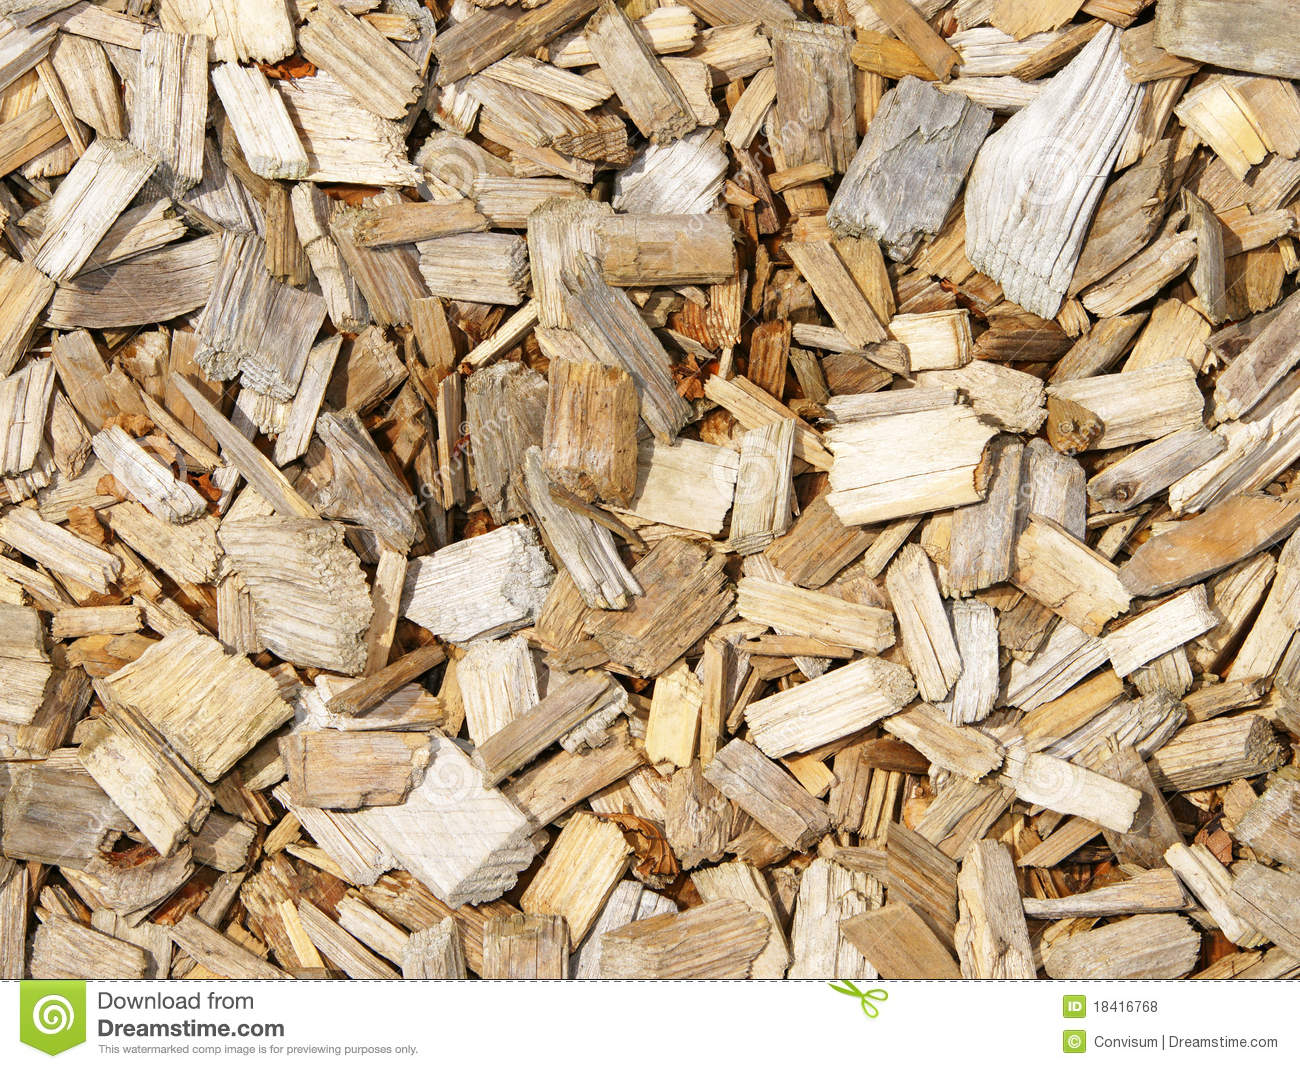 Wood chip clipart.